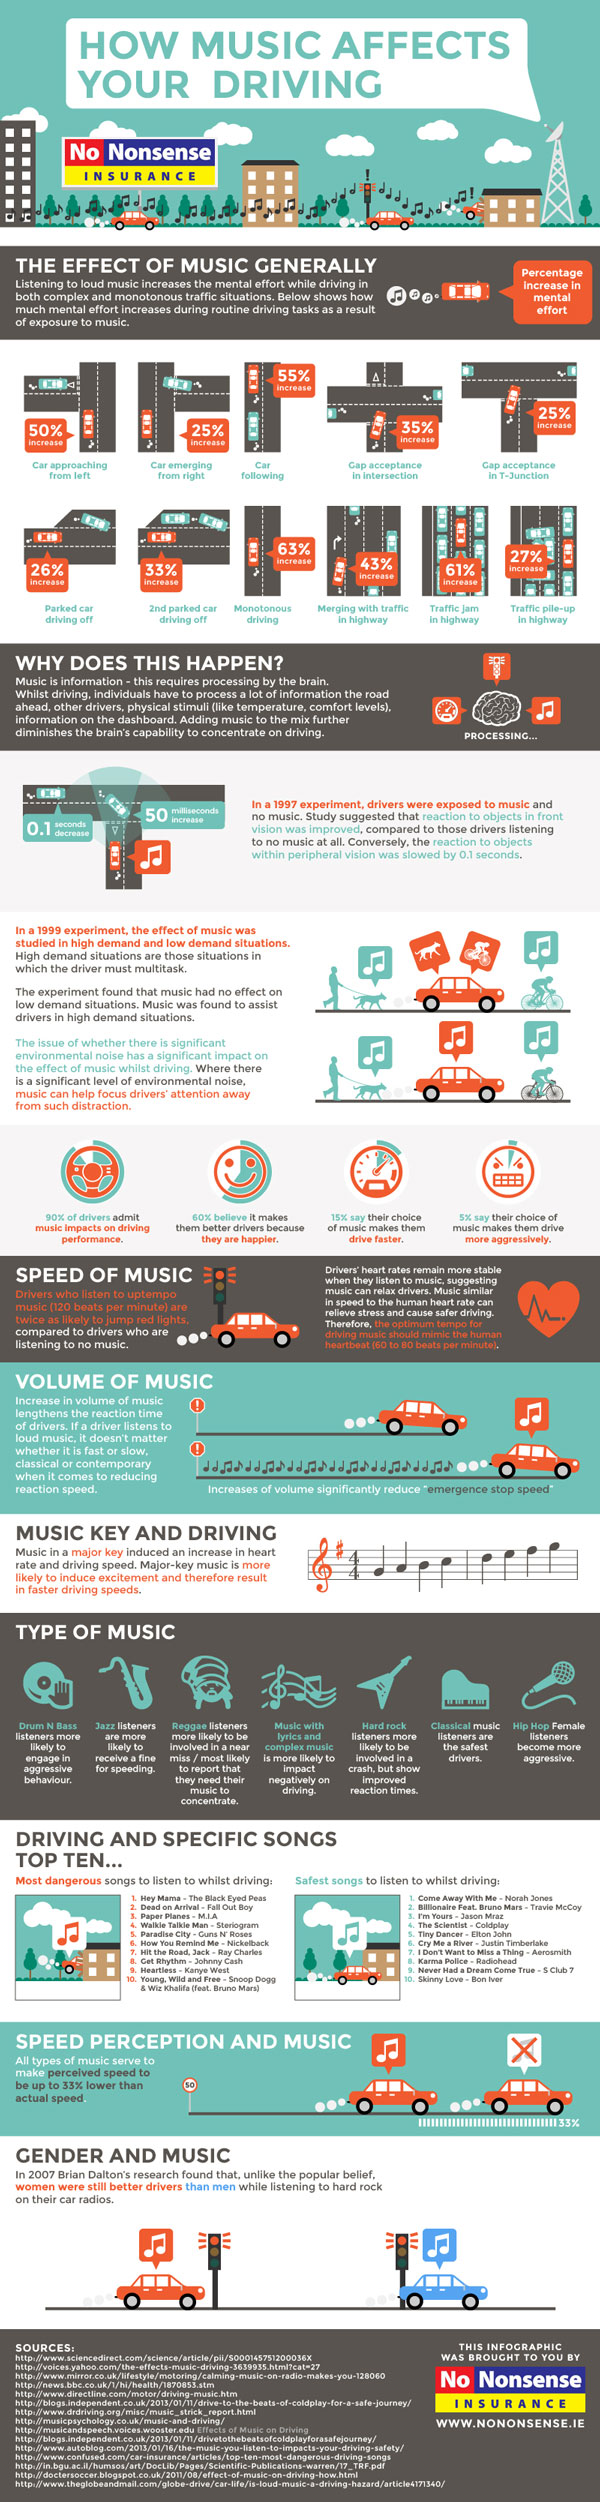 How Music Affects Your Driving v2